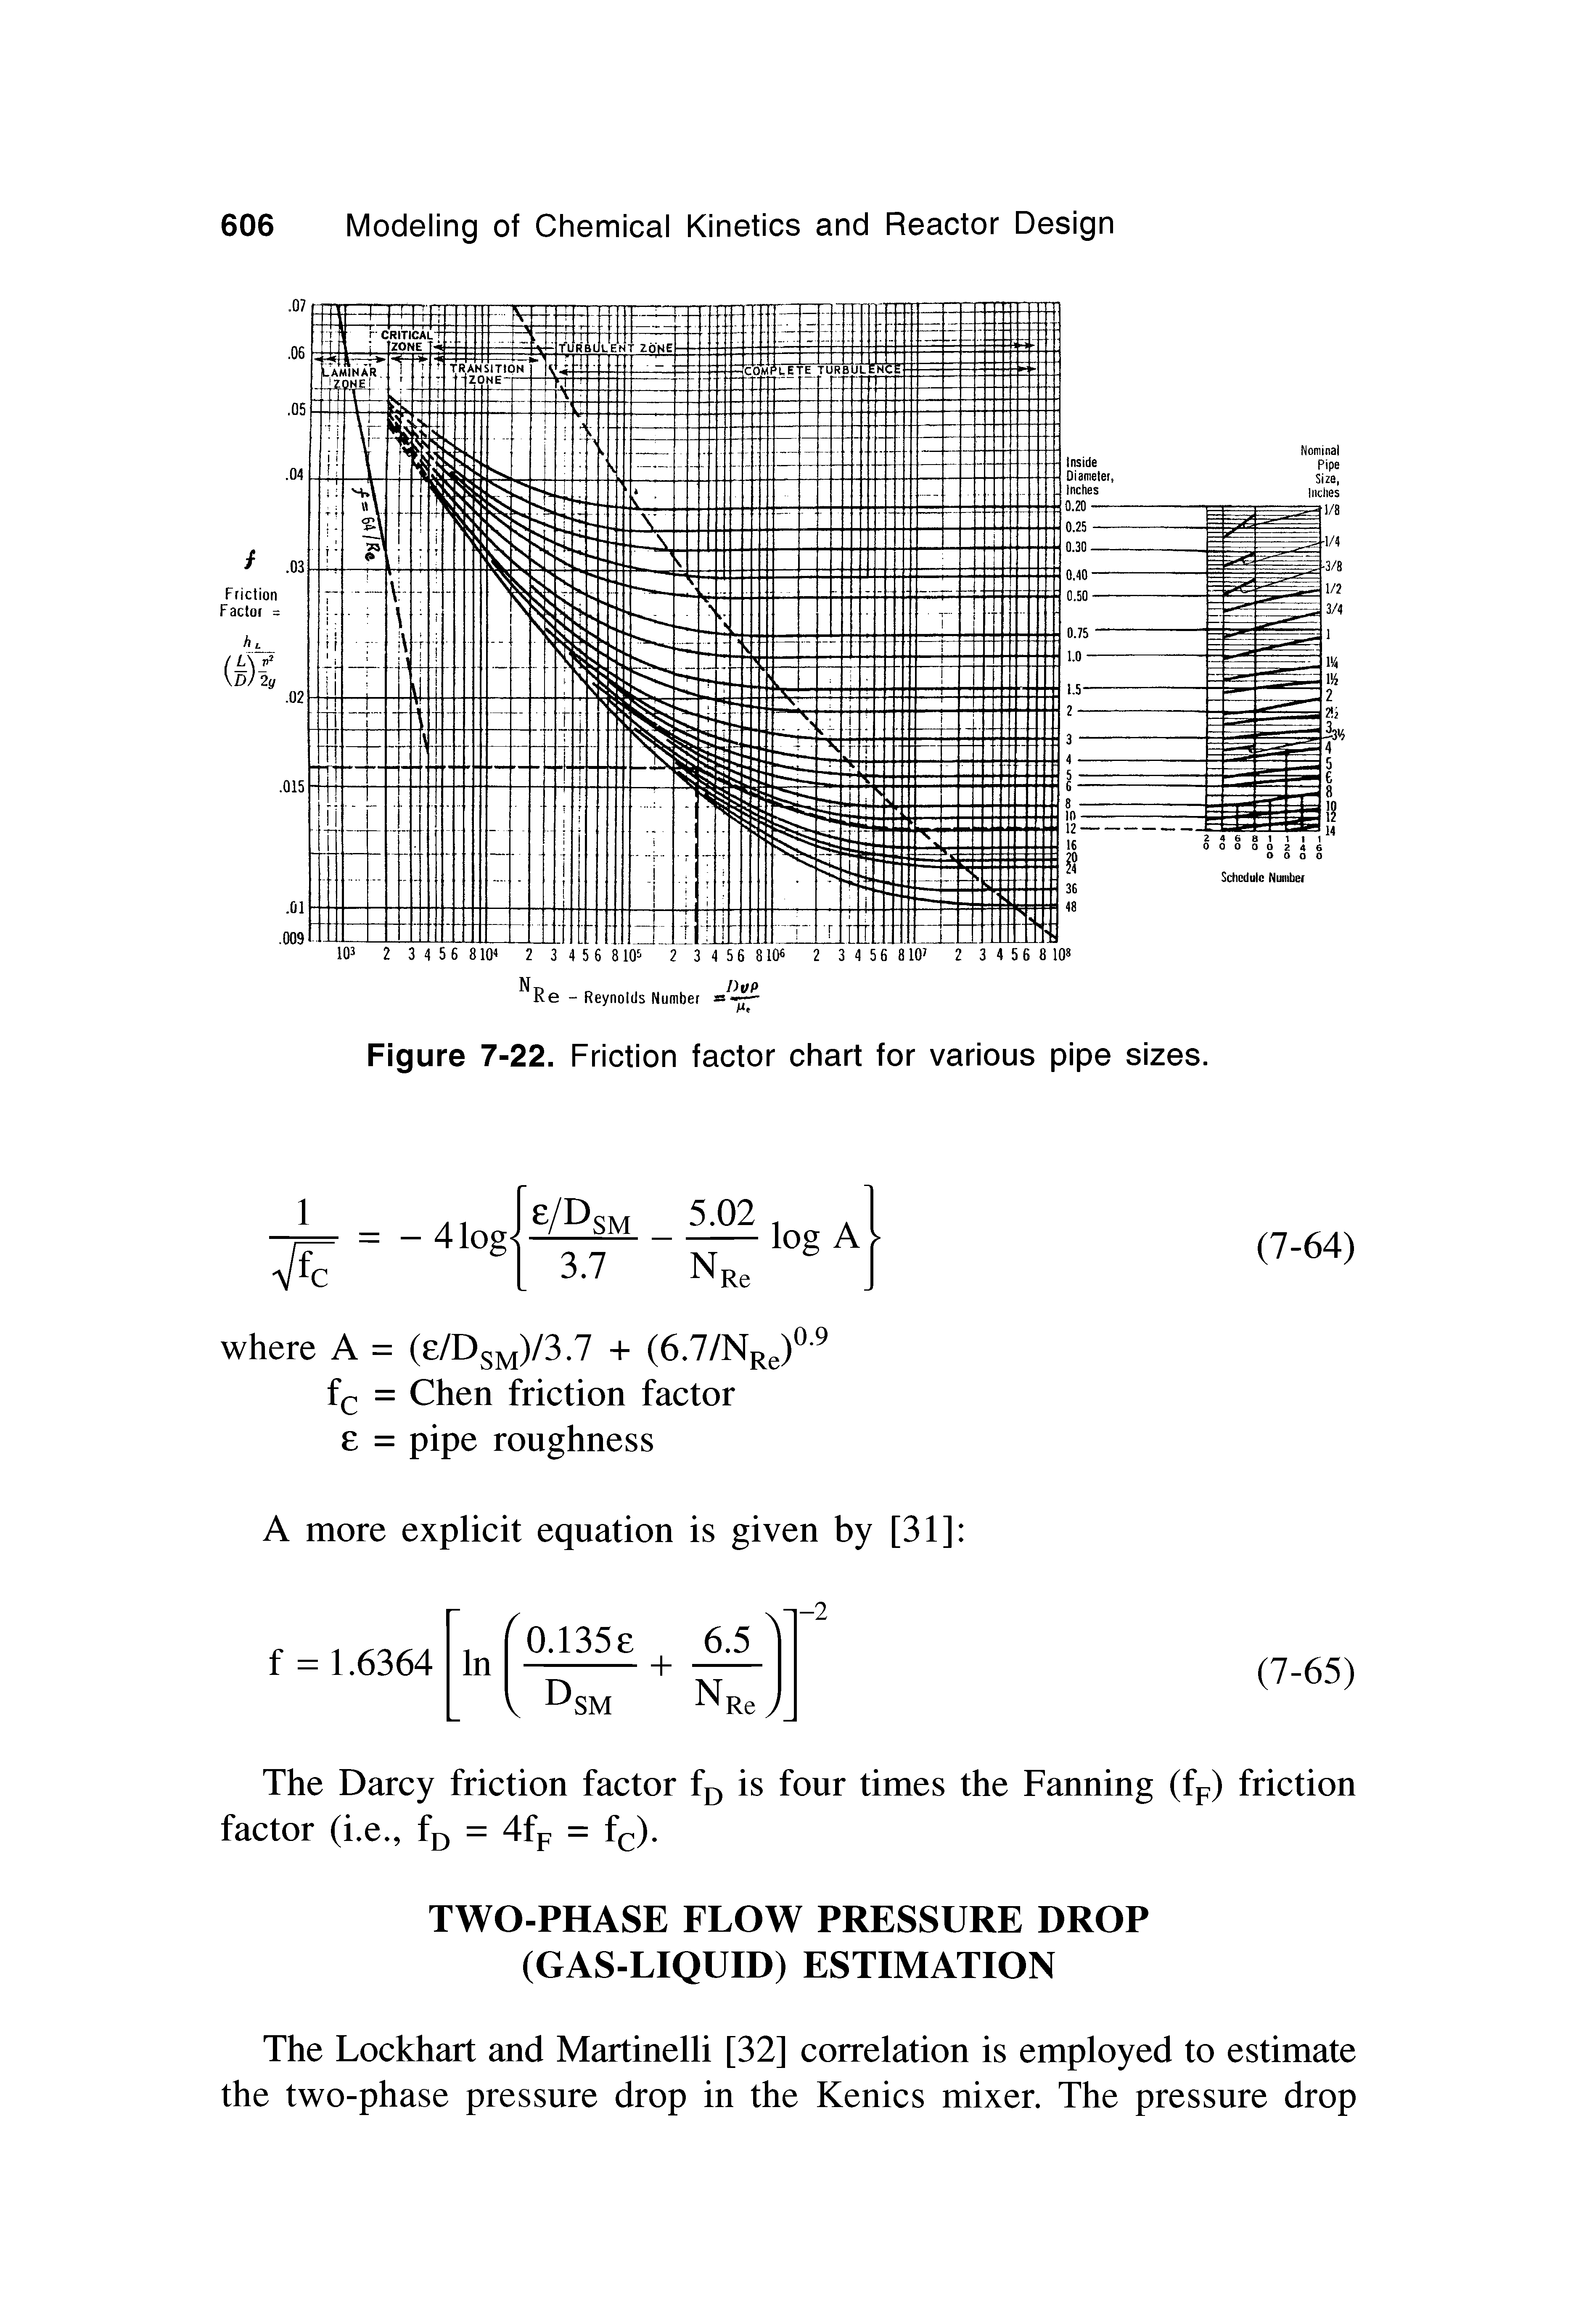 Figure 7-22. Friction factor chart for various pipe sizes.